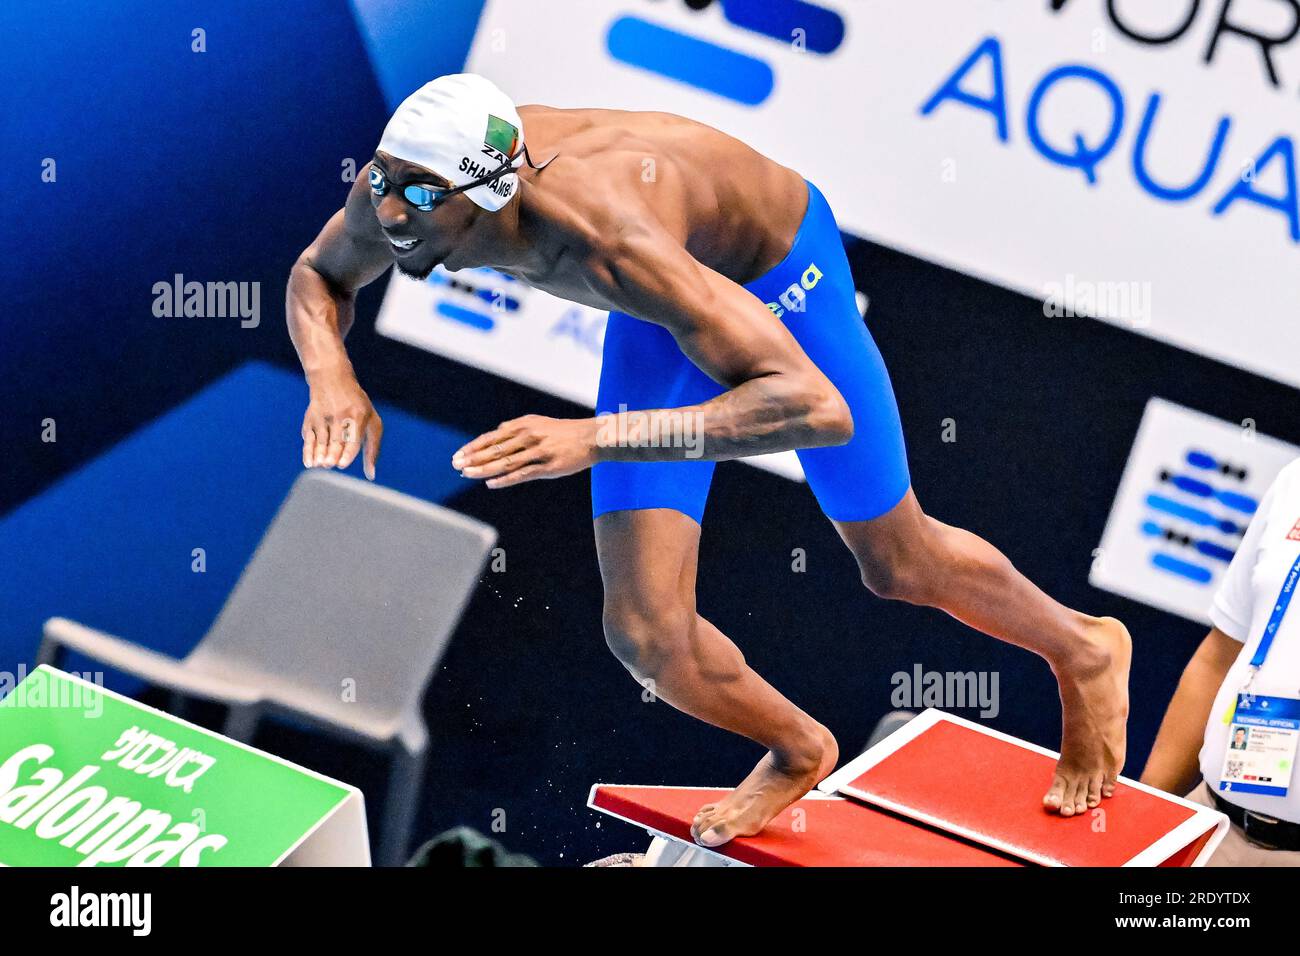 Fukuoka, Japan. 23rd July, 2023. Damien Shamambo of Zambia competes in the 50m Butterfly Men Heats during the 20th World Aquatics Championships at the Marine Messe Hall A in Fukuoka (Japan), July 23rd, 2023. Credit: Insidefoto di andrea staccioli/Alamy Live News Stock Photo